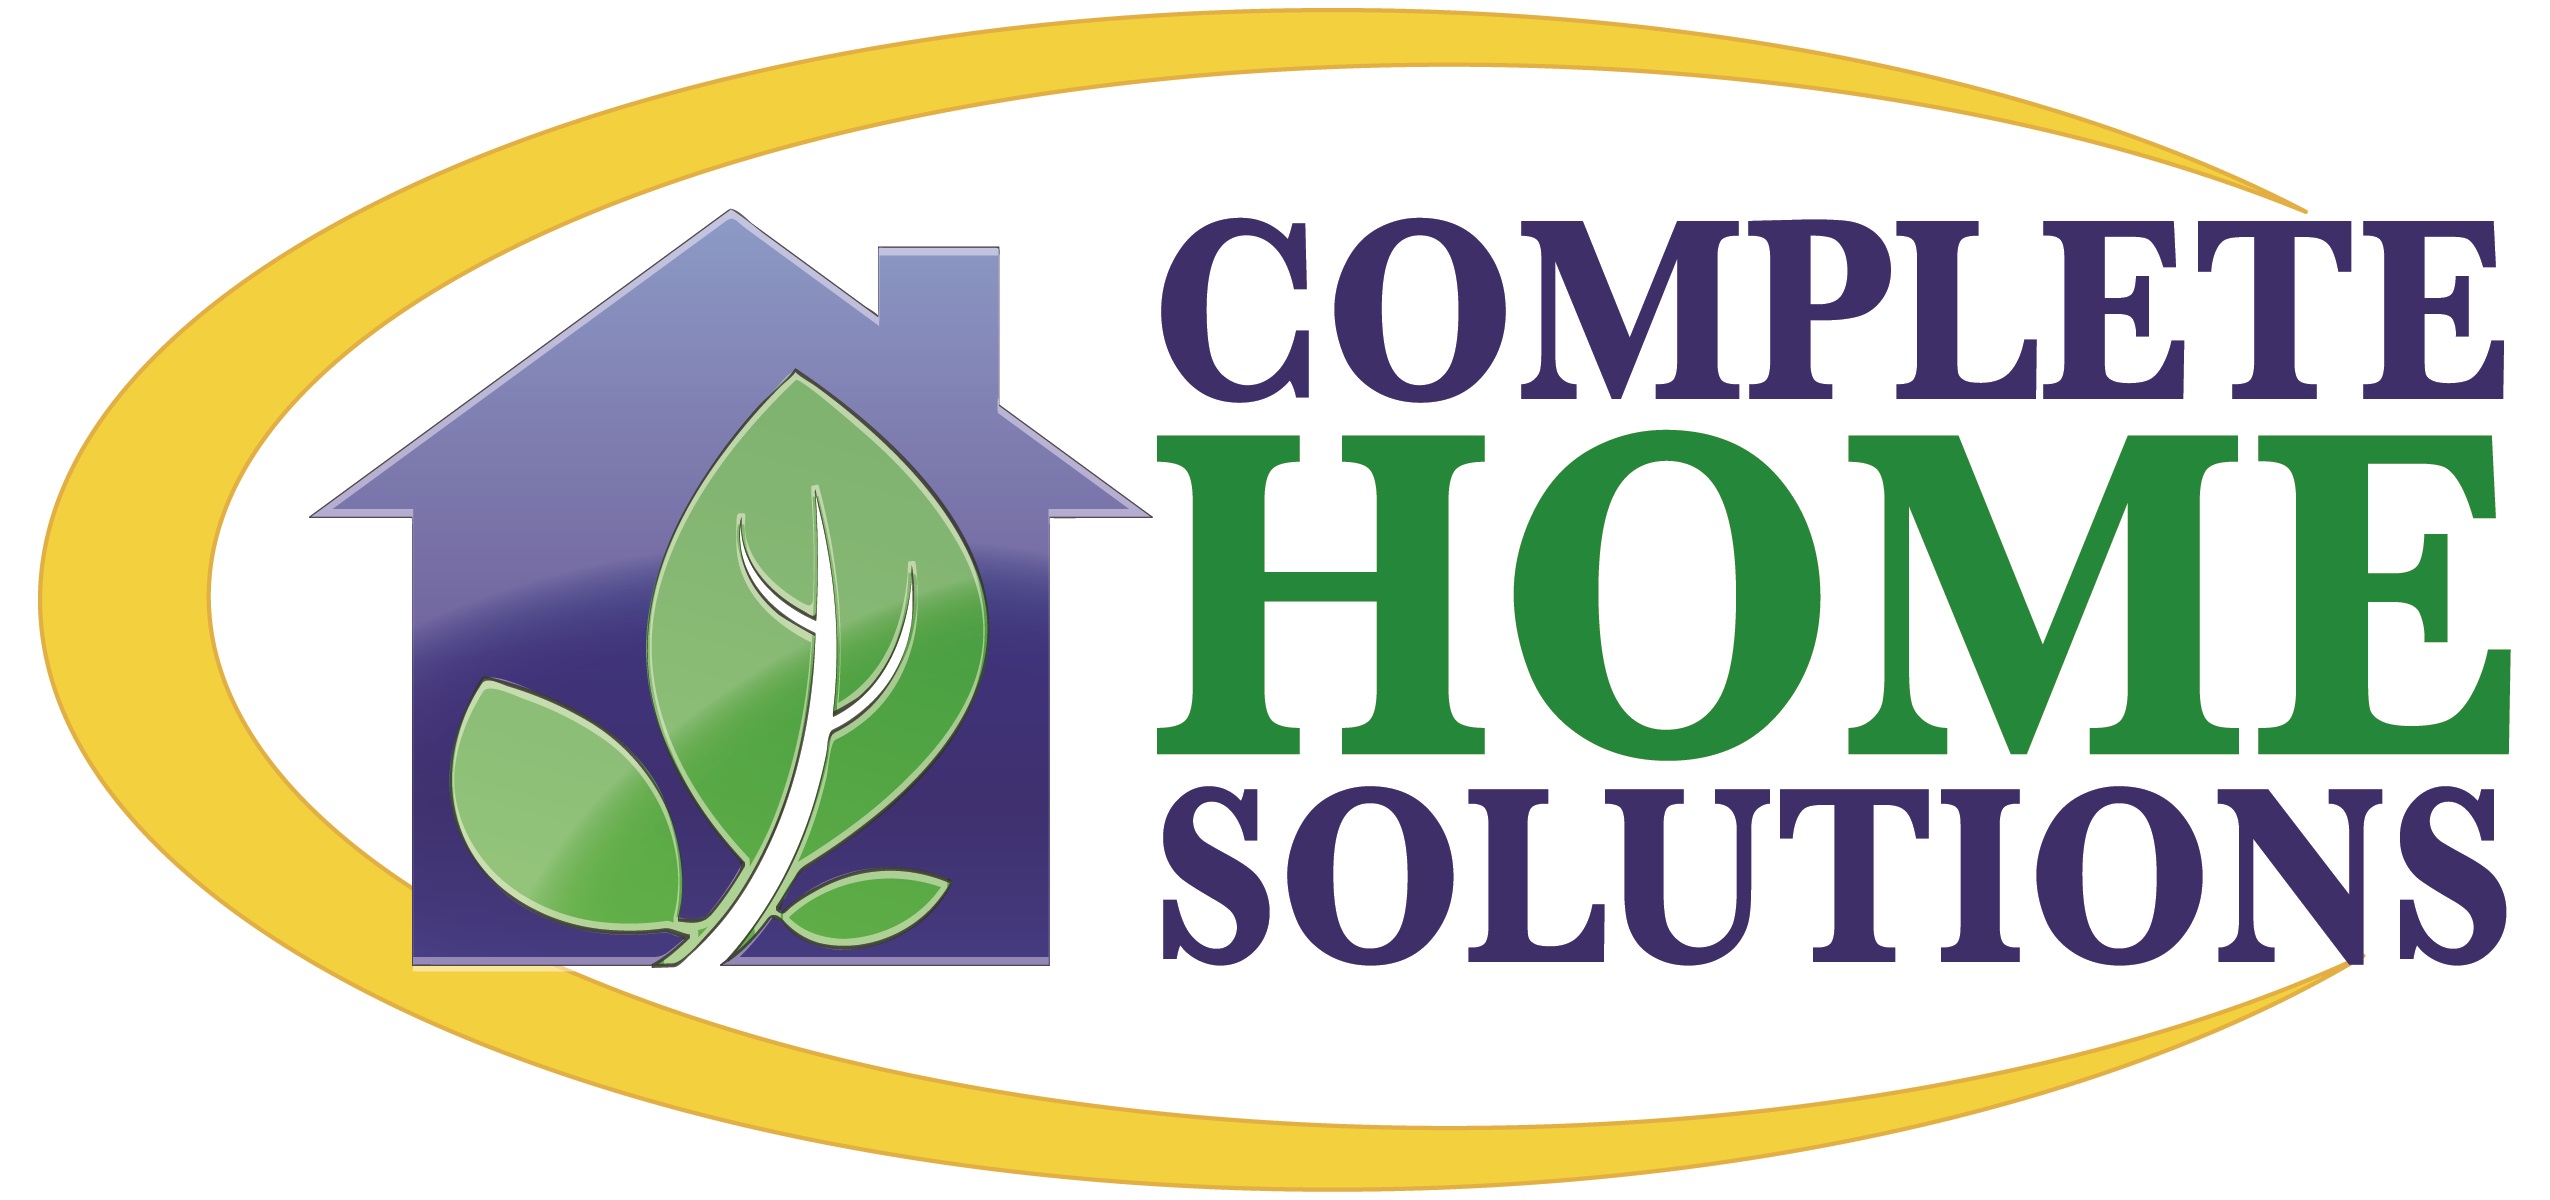 Complete Home Solutions, LLC company logo